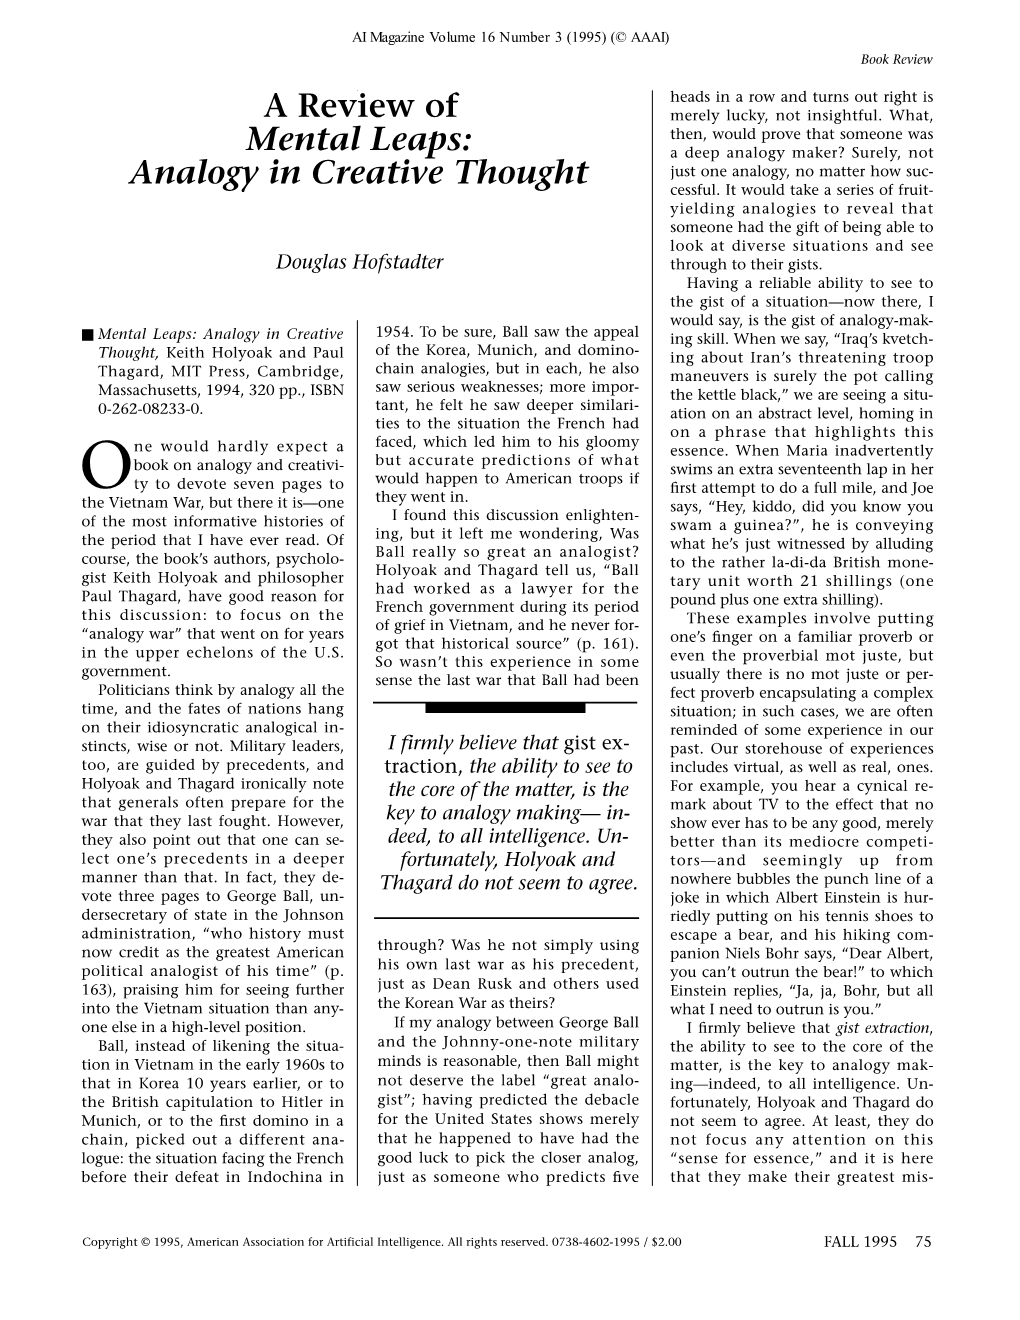 A Review of Mental Leaps: Analogy in Creative Thought